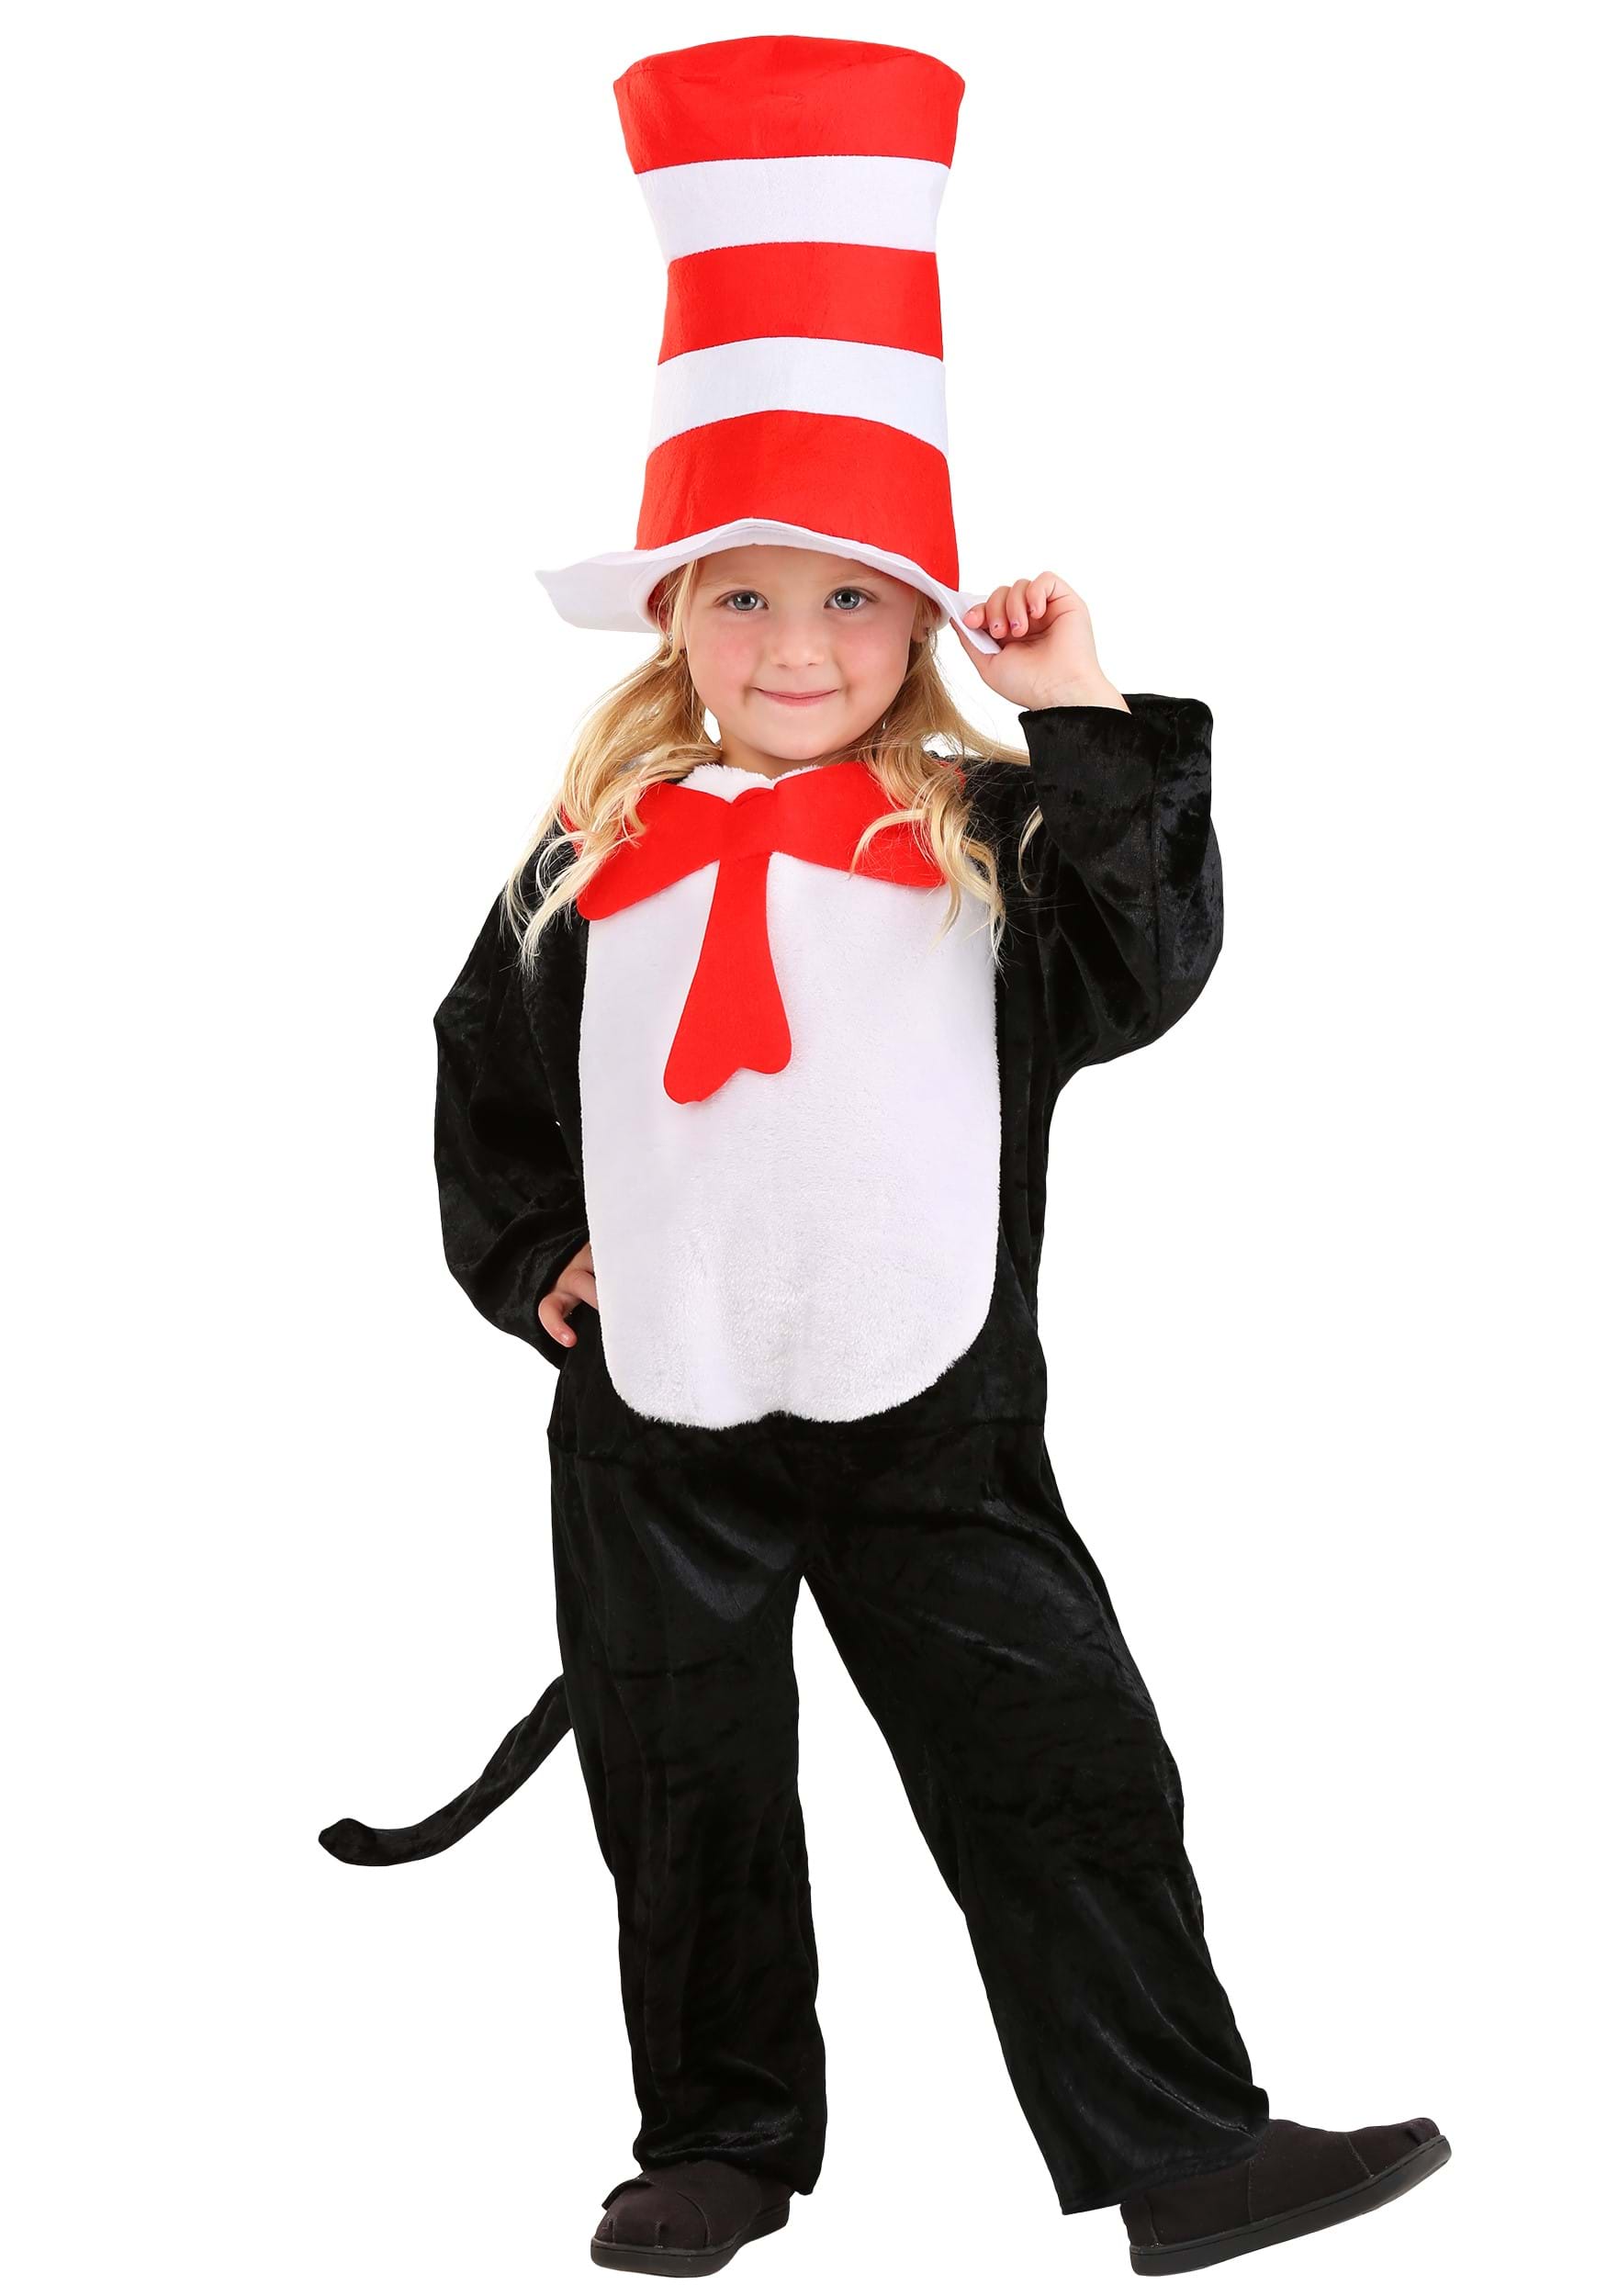 The Cat in the Hat Costume For Toddlers